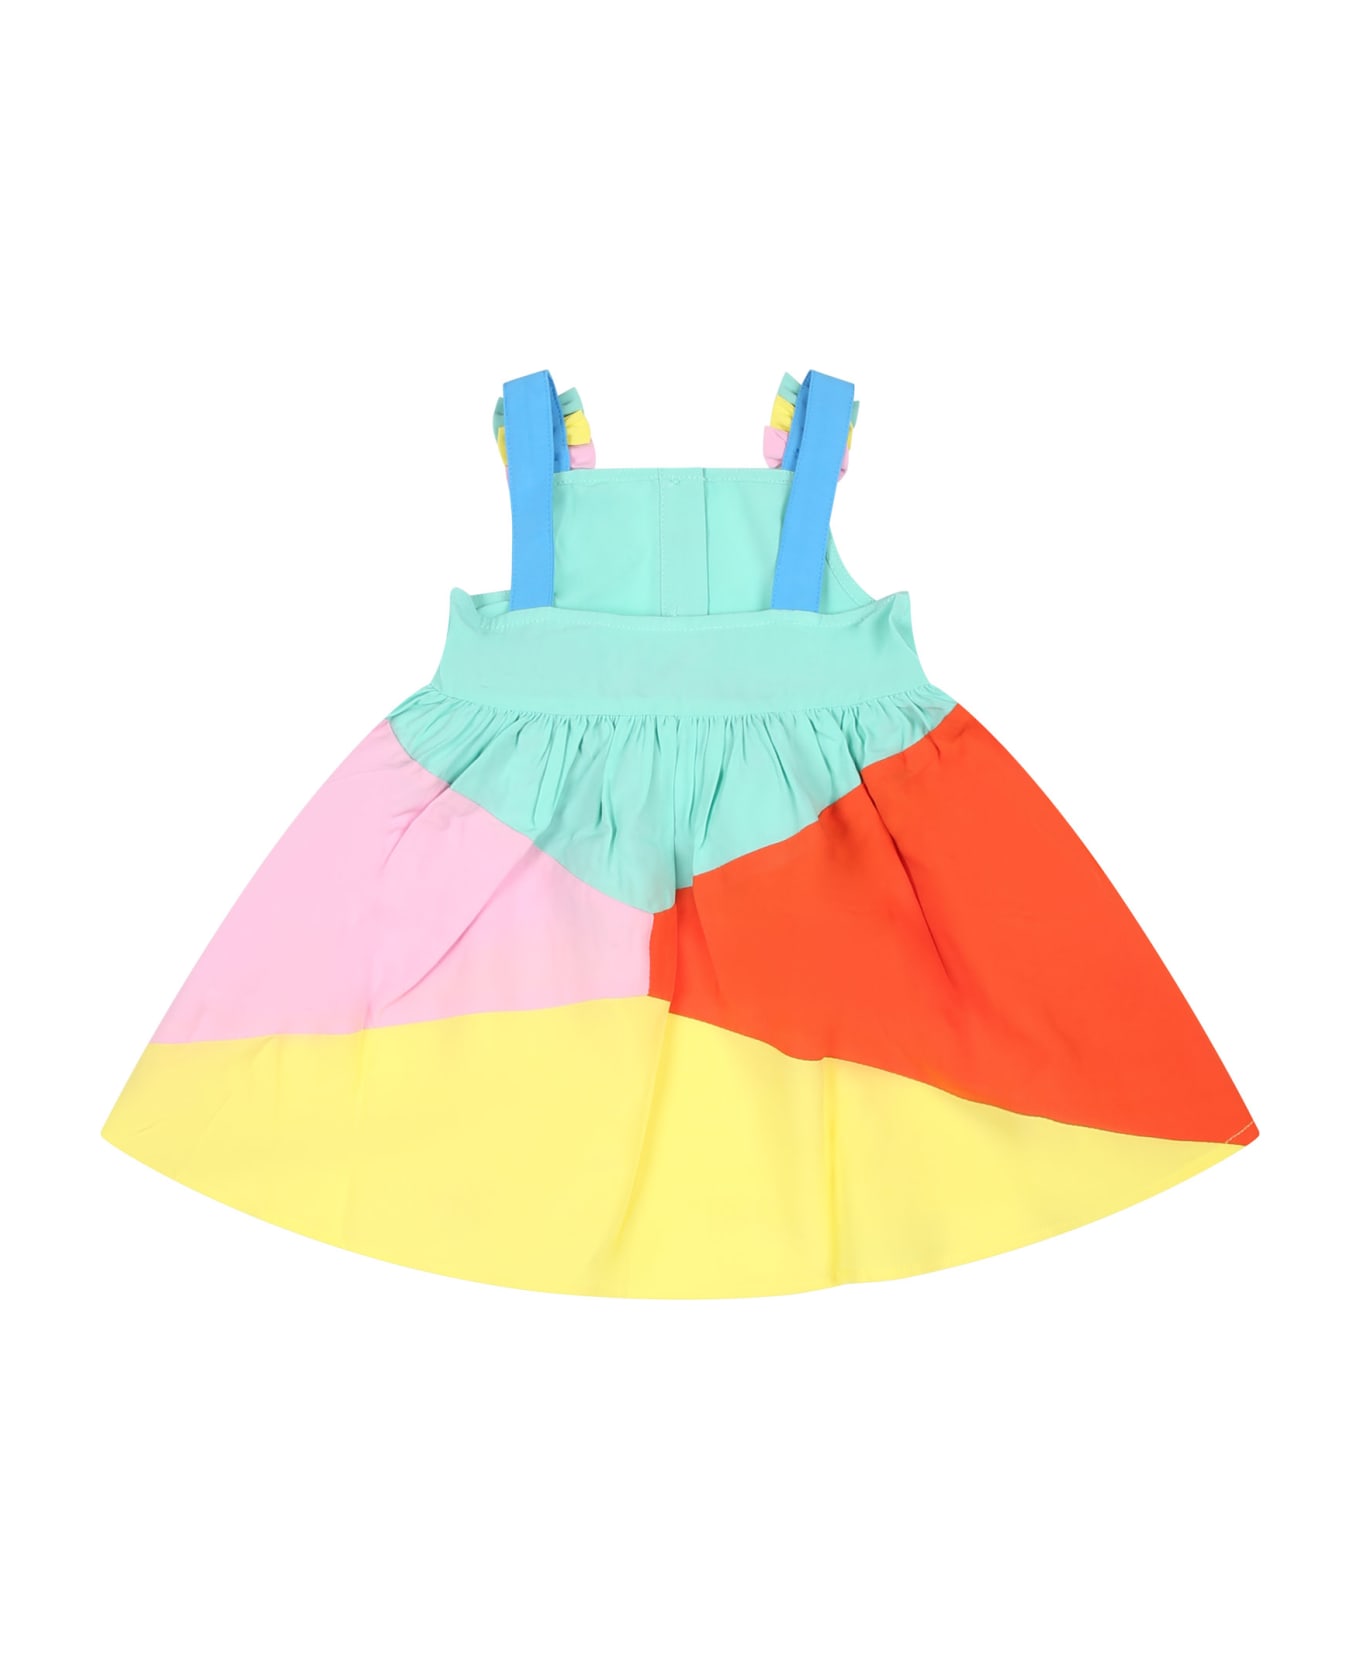 Stella McCartney Kids Green Dress For Baby Girl With Bows - Multicolor